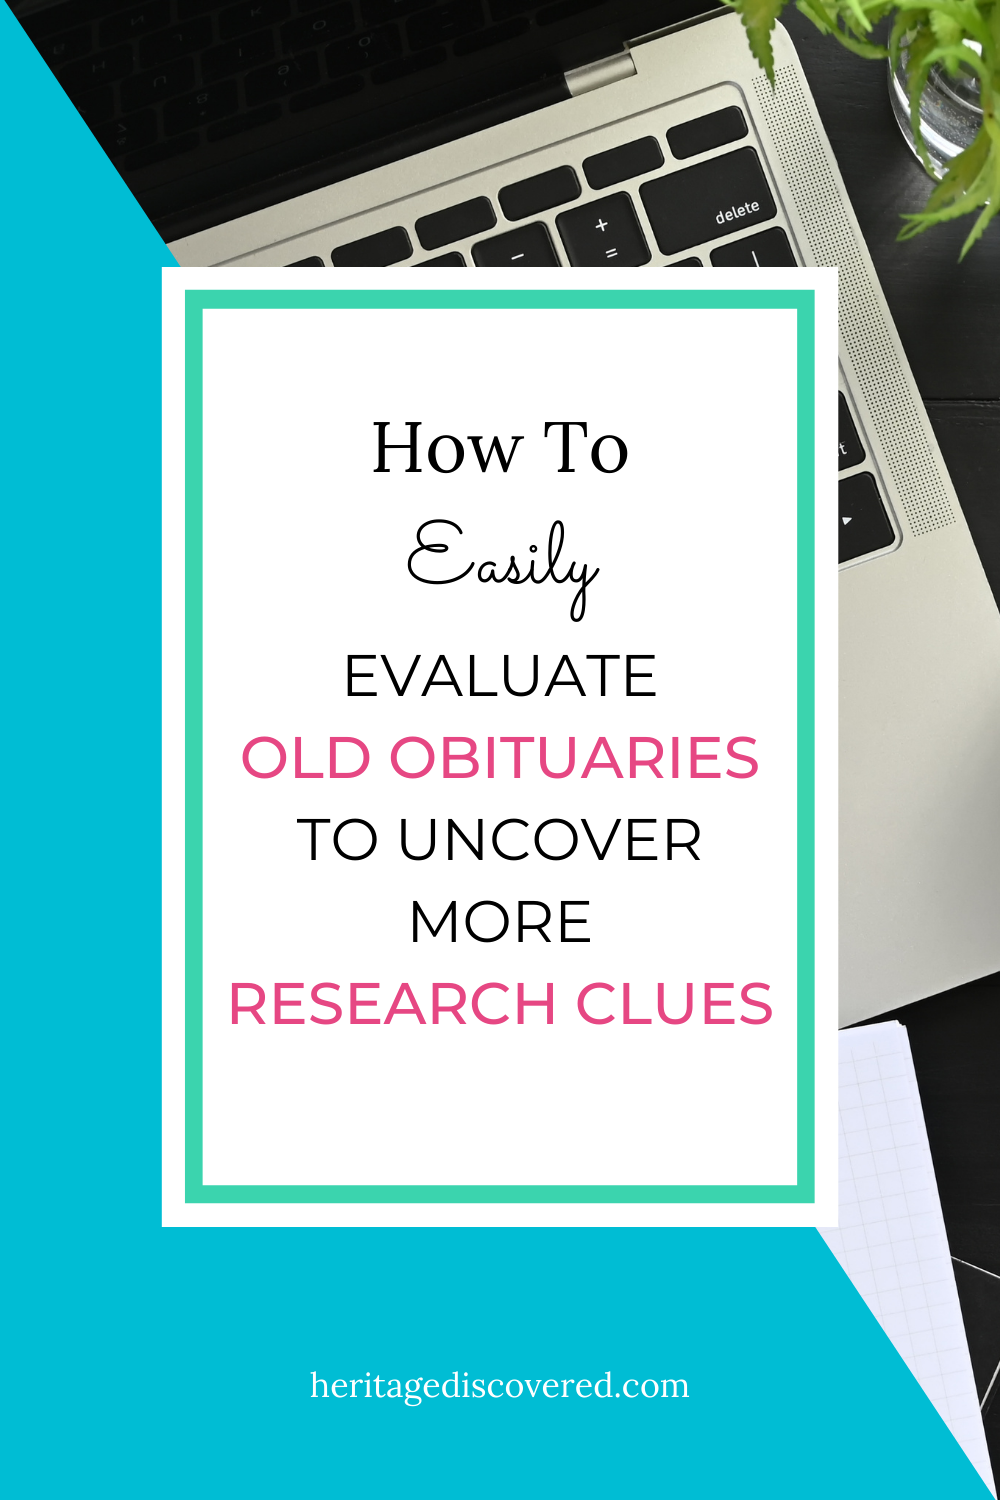 how-to-easily-evaluate-old-obituaries-uncover-more-research-clues